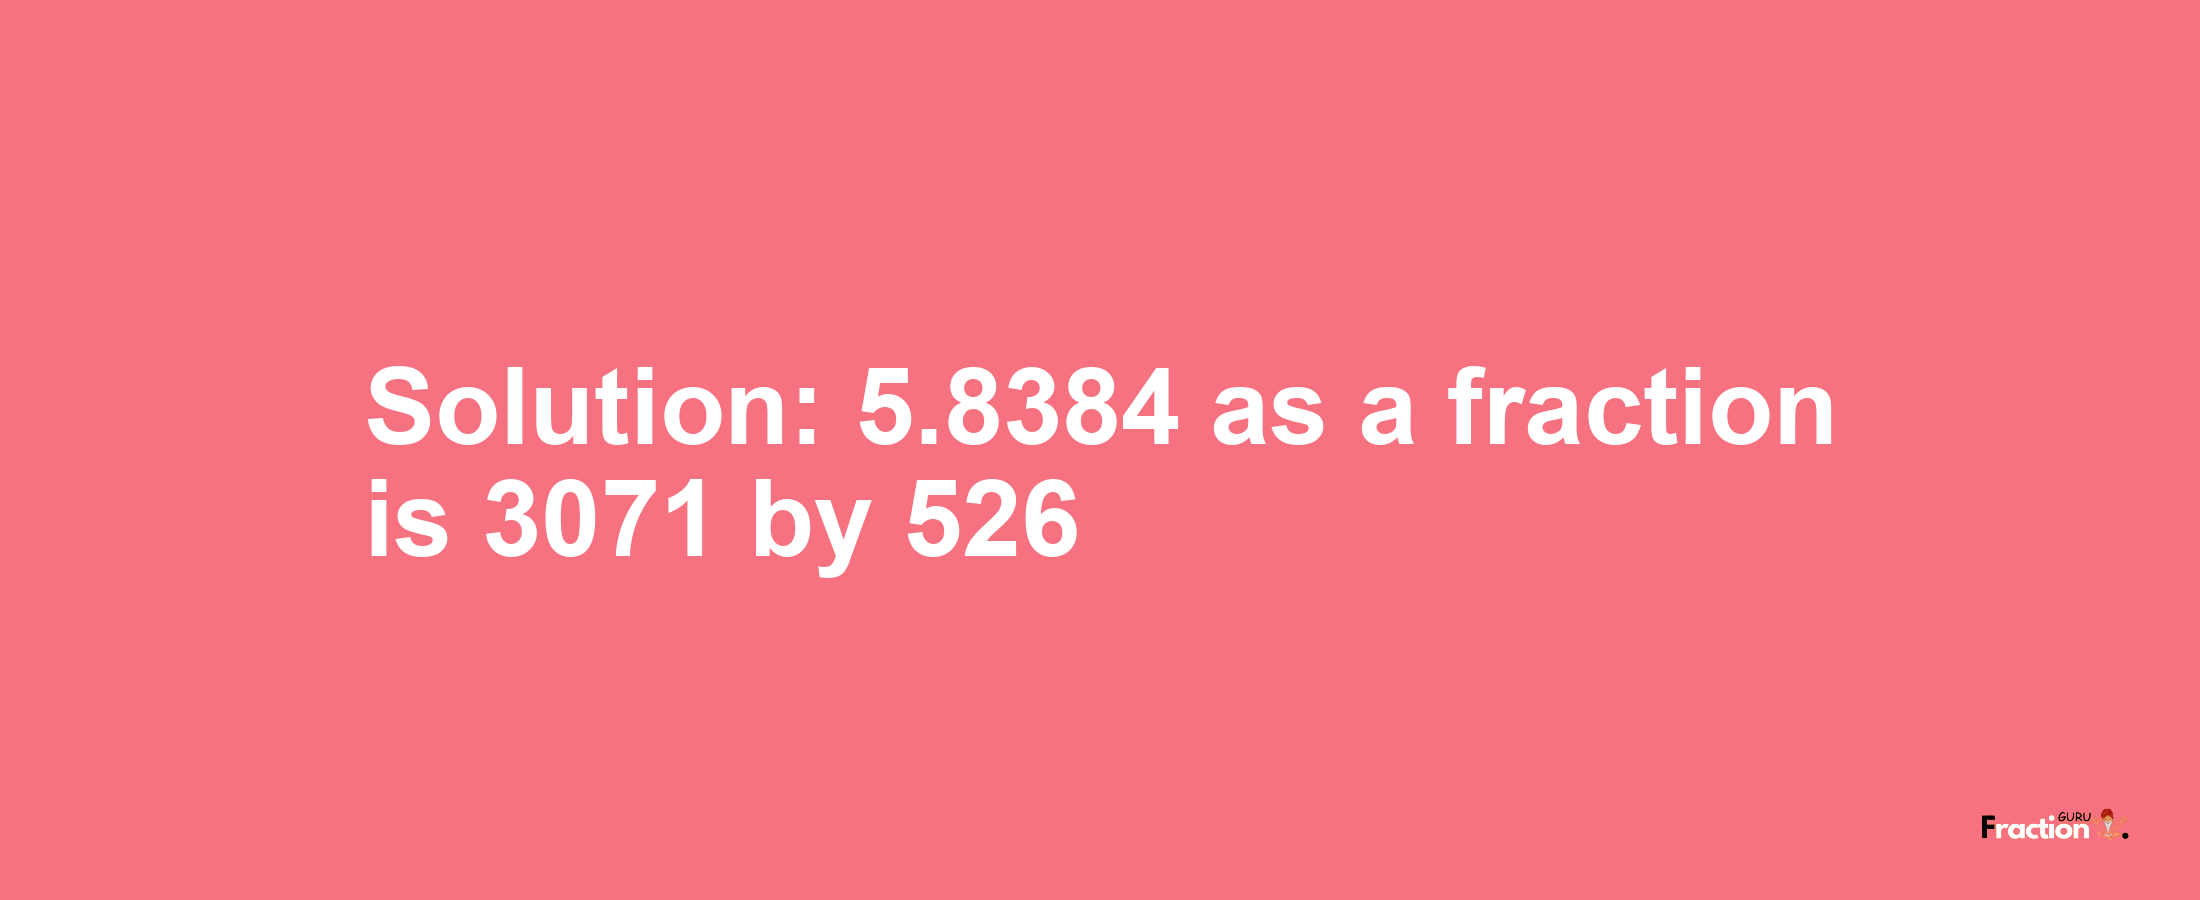 Solution:5.8384 as a fraction is 3071/526